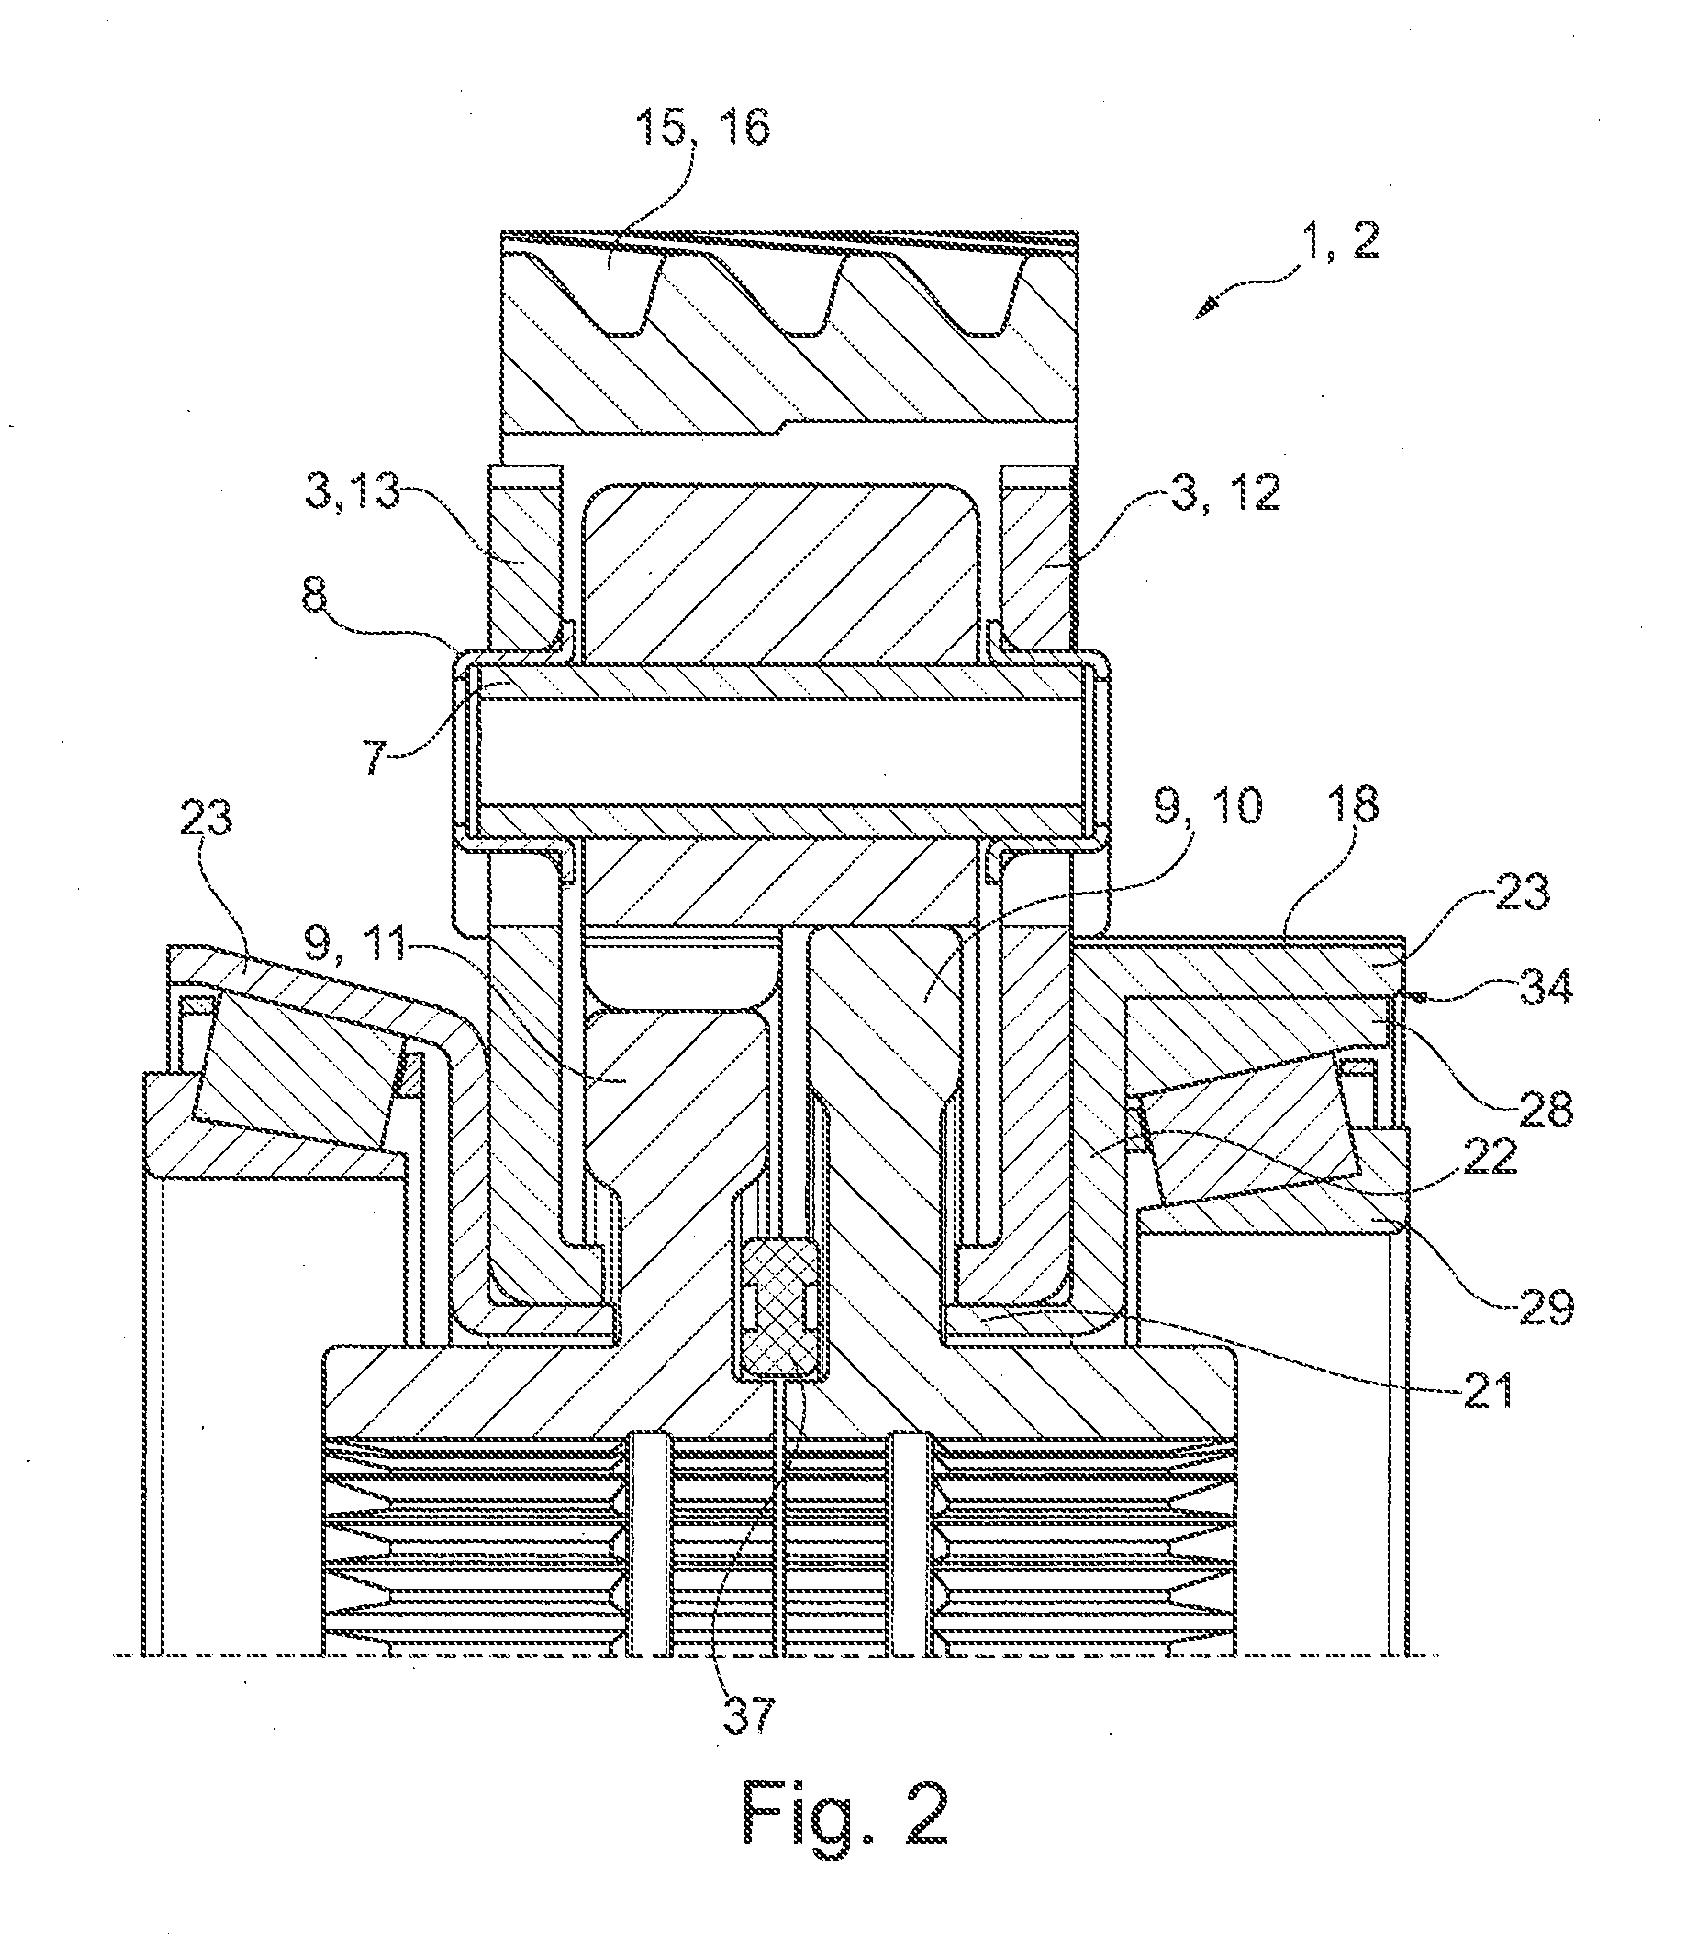 Planetary gearbox comprising a differential